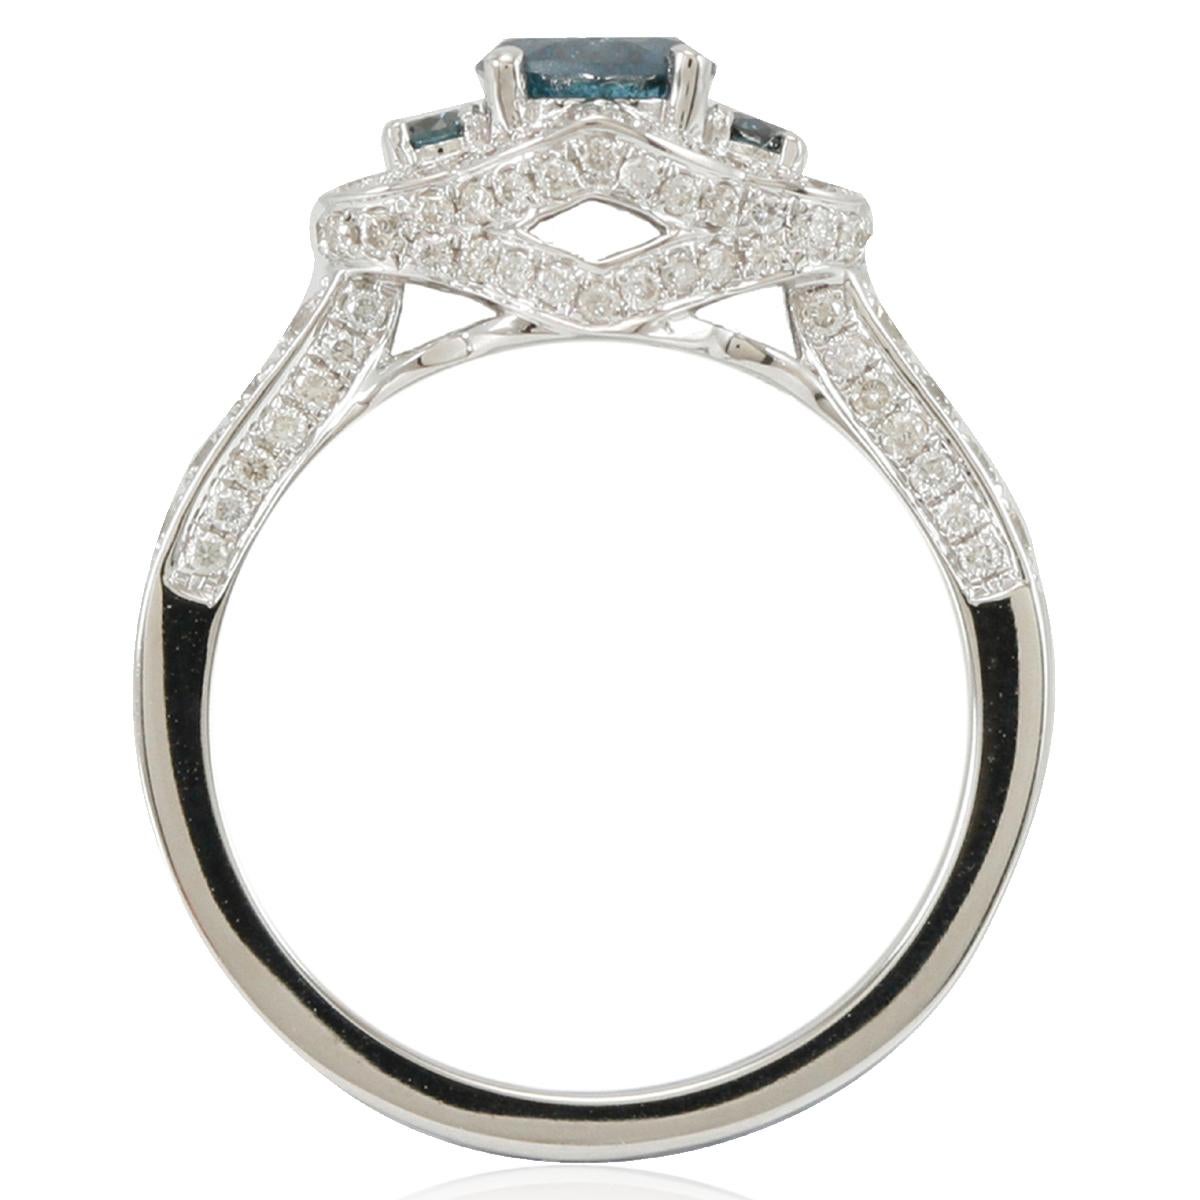 This strikingly gorgeous, one-of-a-kind engagement ring by Suzy Levian is a 3-stone blue diamond solitaire with a white diamond pave halo. Elegantly crafted in 14K white gold, this ring features a brilliant-cut round blue diamond center stone